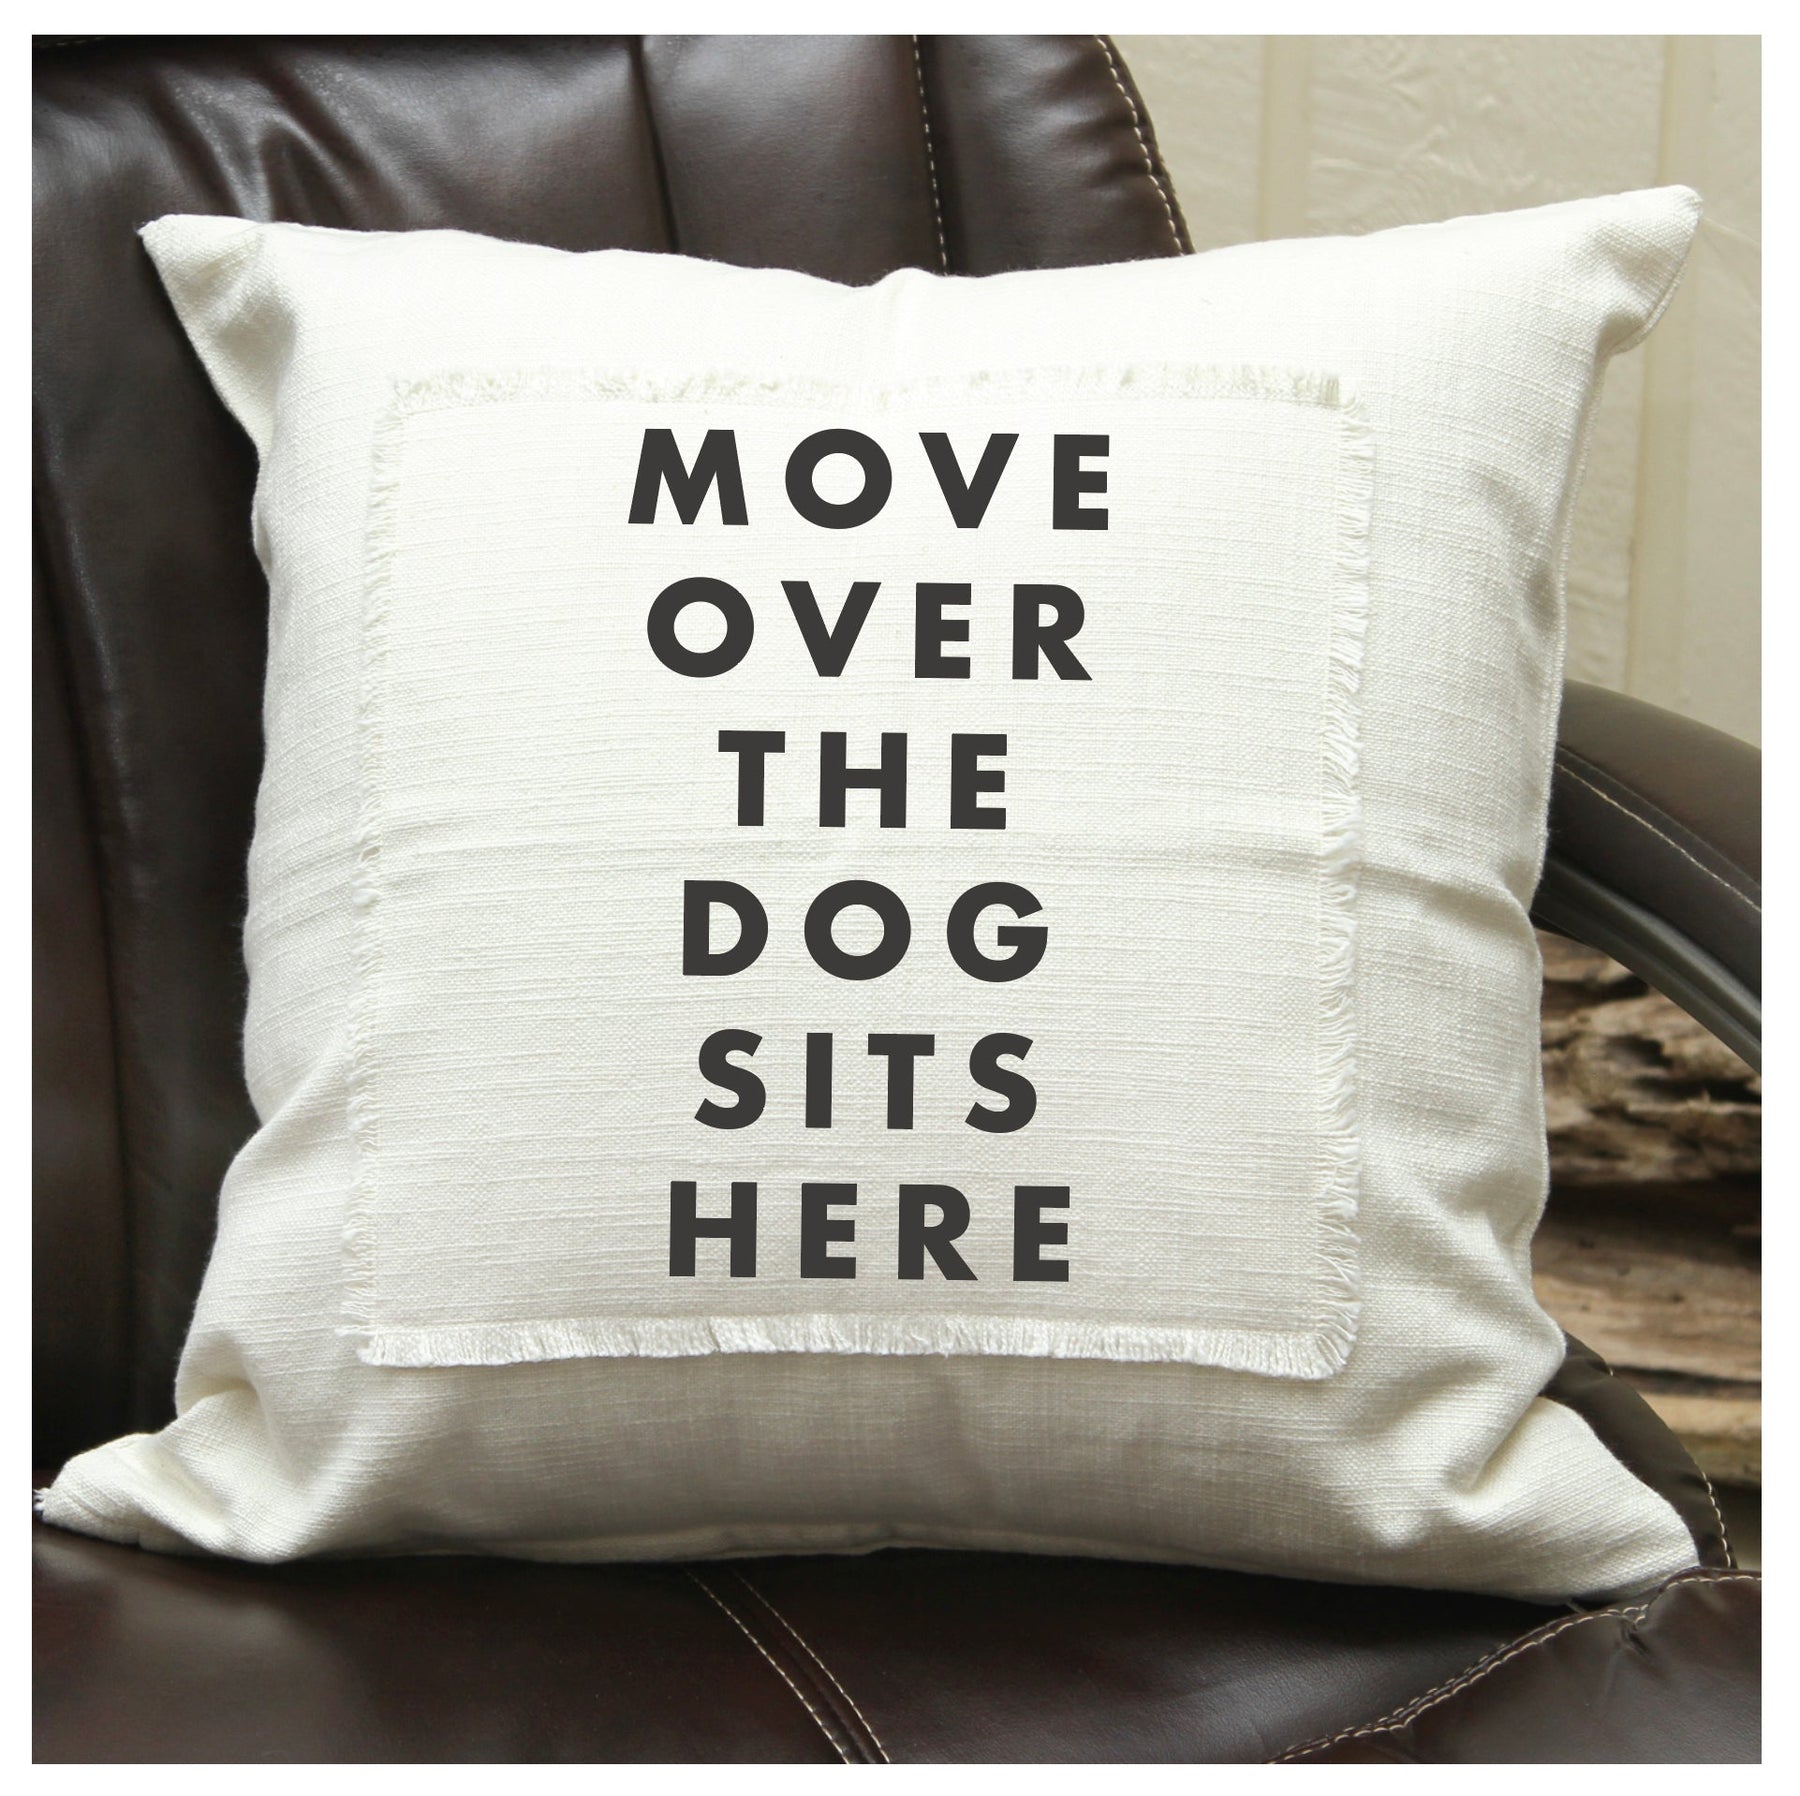 Move over the dog sits here Pillow